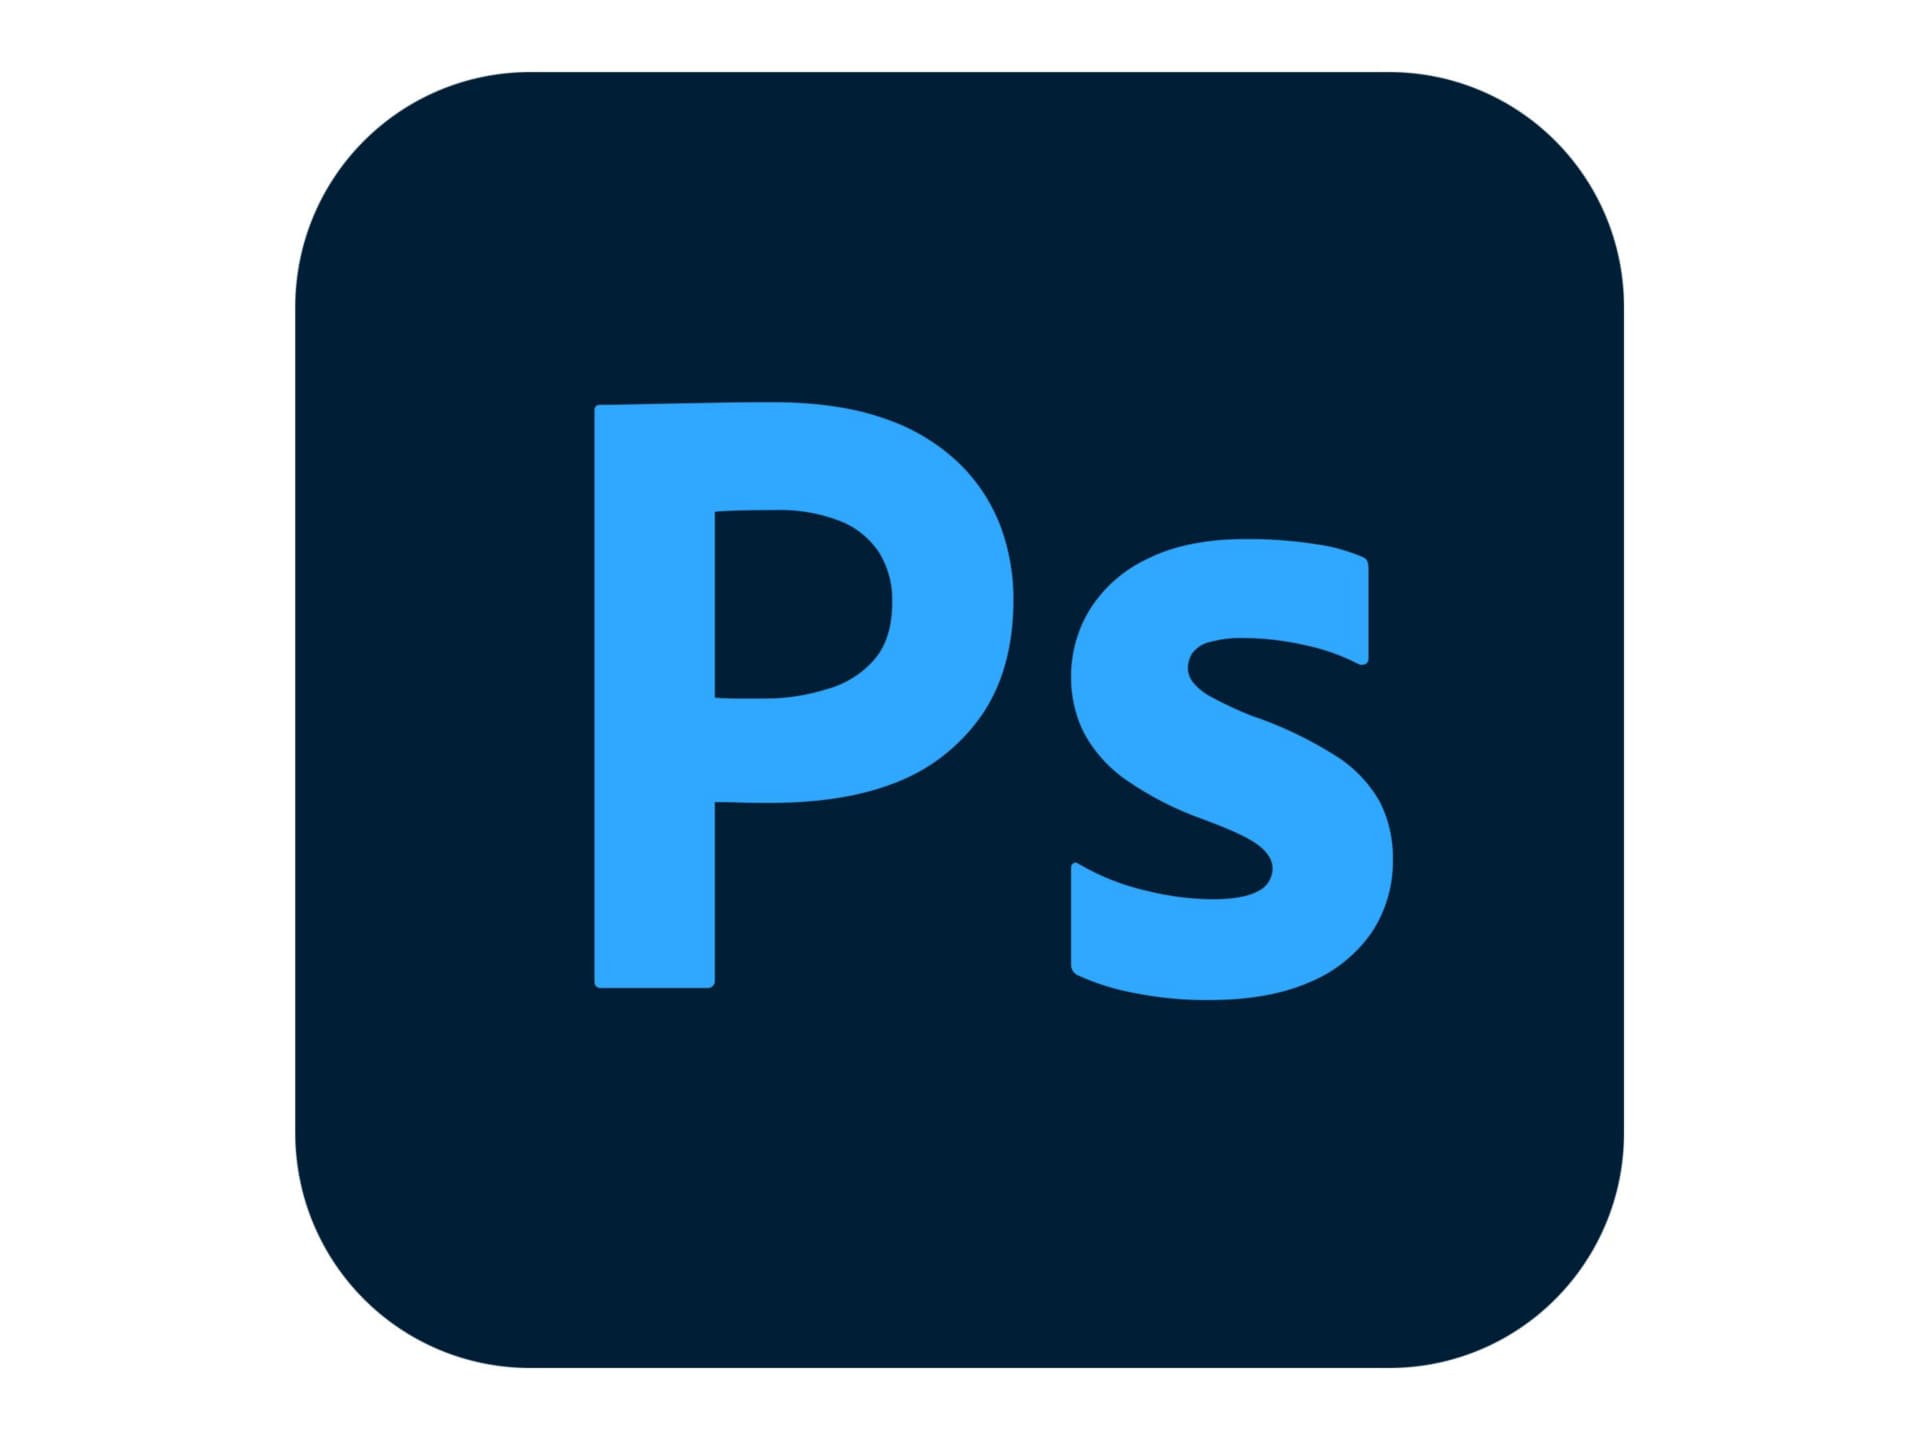 Adobe Photoshop CC for teams - Subscription New (6 months) - 1 named user